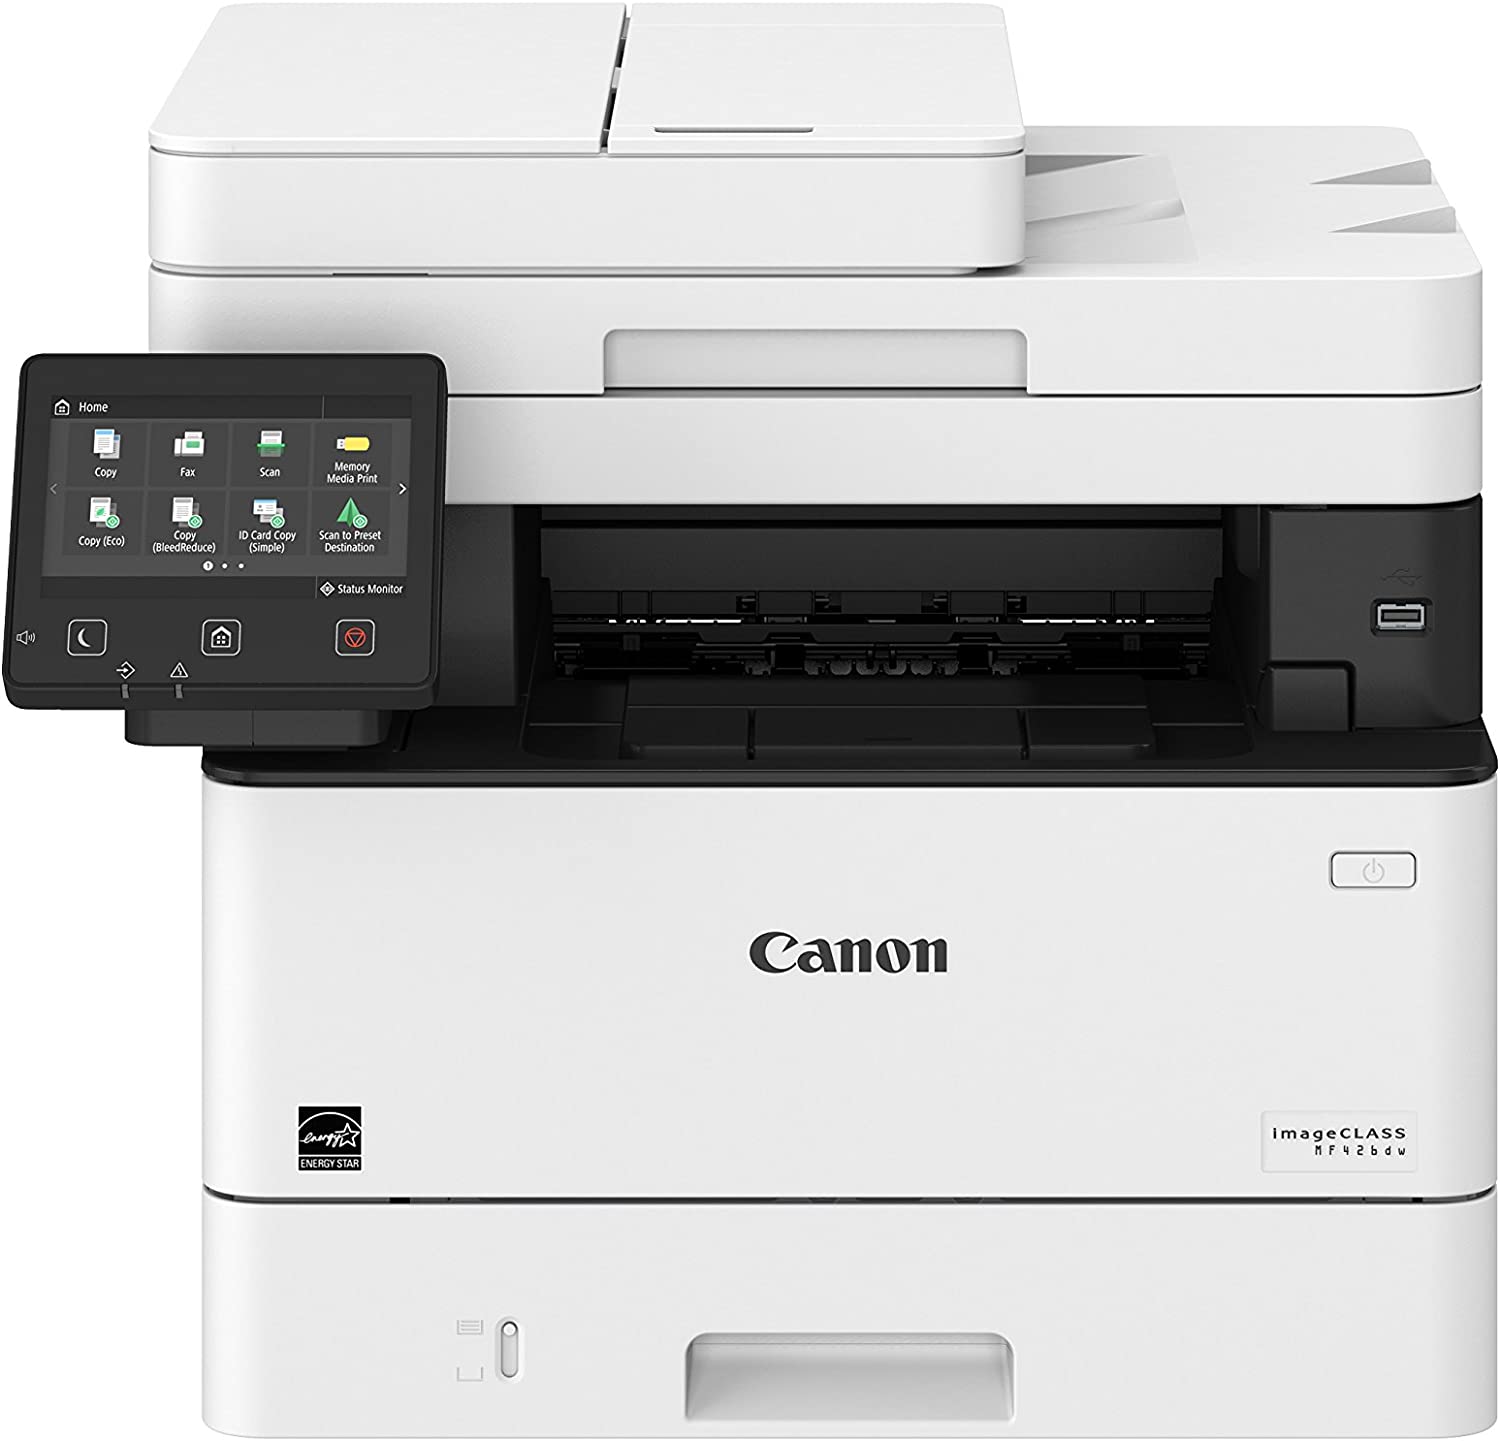 The $335 laser printer from Canon may seem excessive, but printing in my home office has never been easier